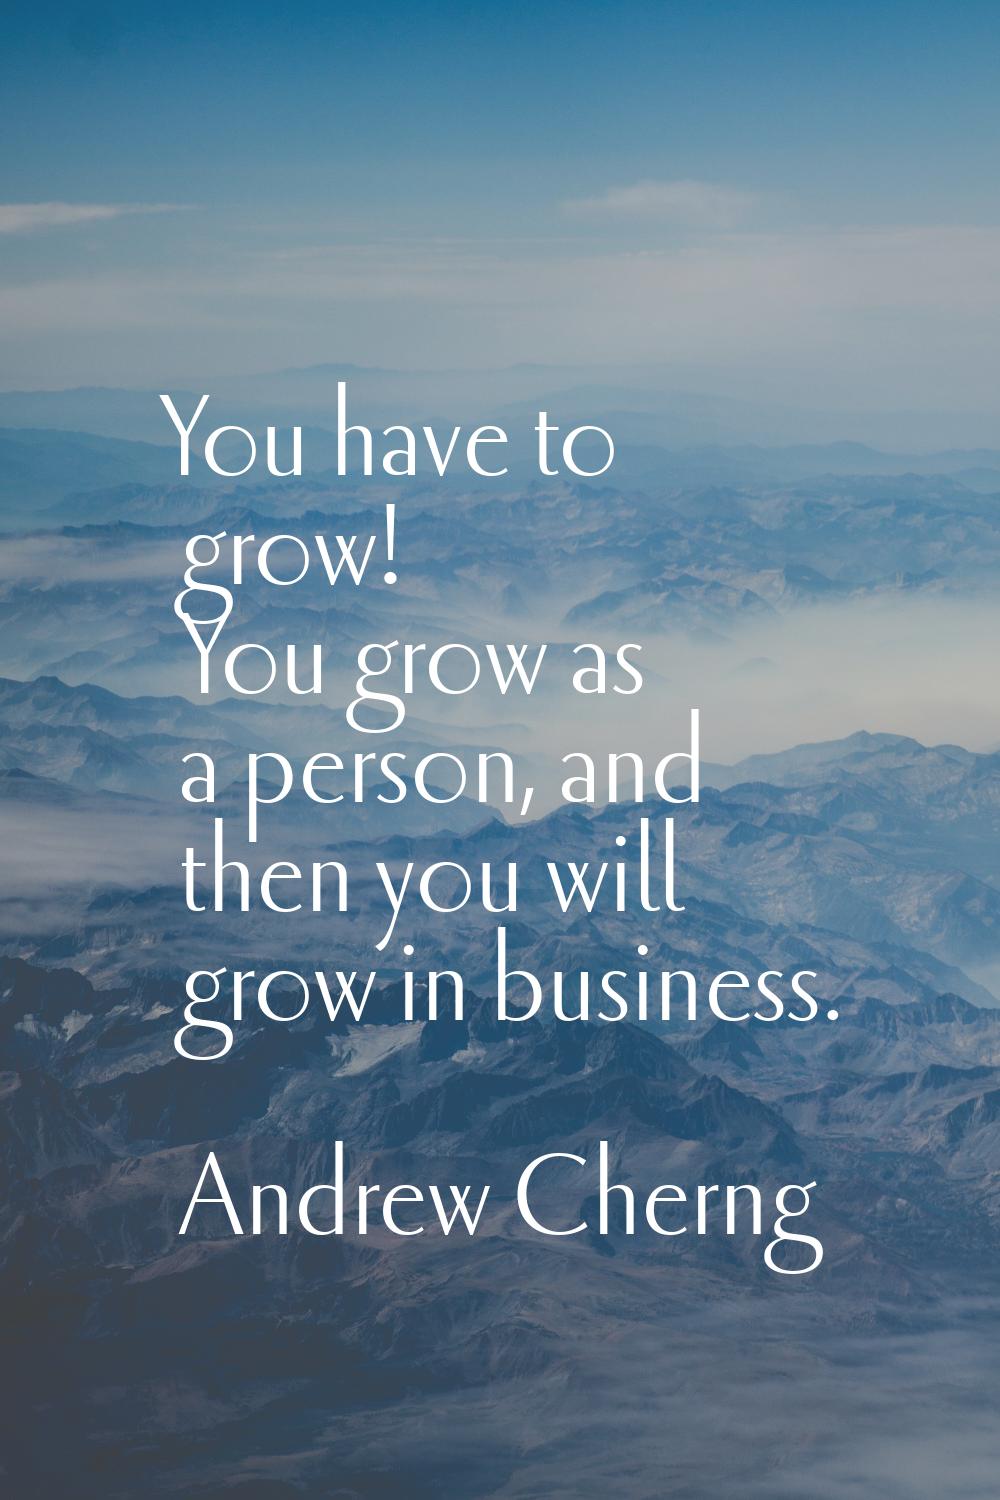 You have to grow! You grow as a person, and then you will grow in business.